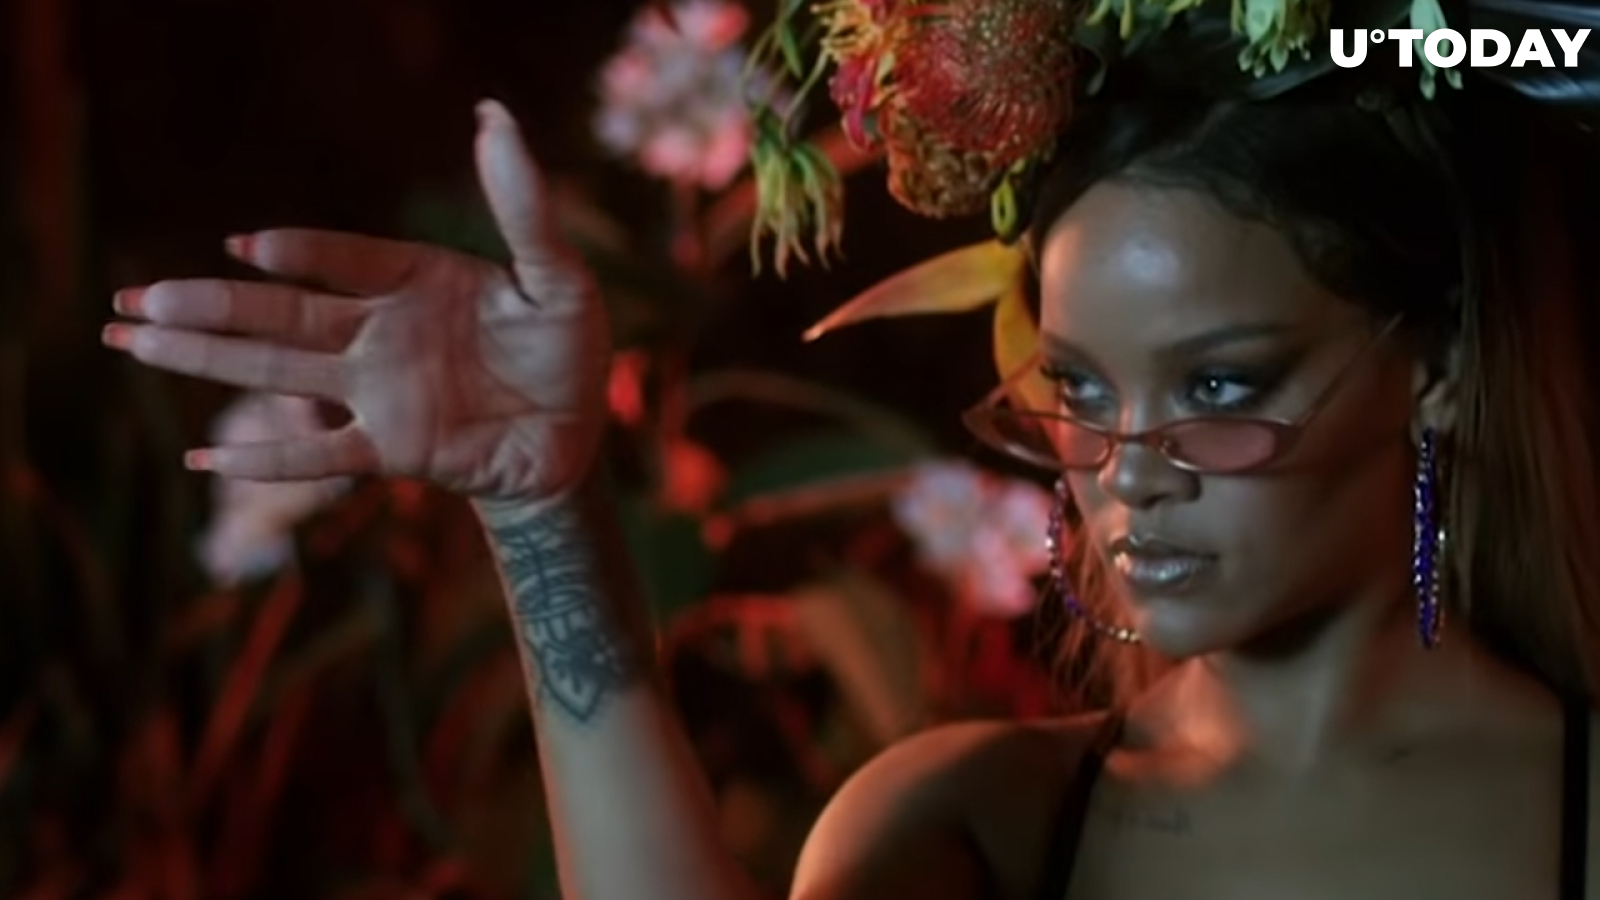 Pop Singer Rihanna's Love for Cryptocurrency Takes Beauty Company "Fenty" to the Metaverse: Details